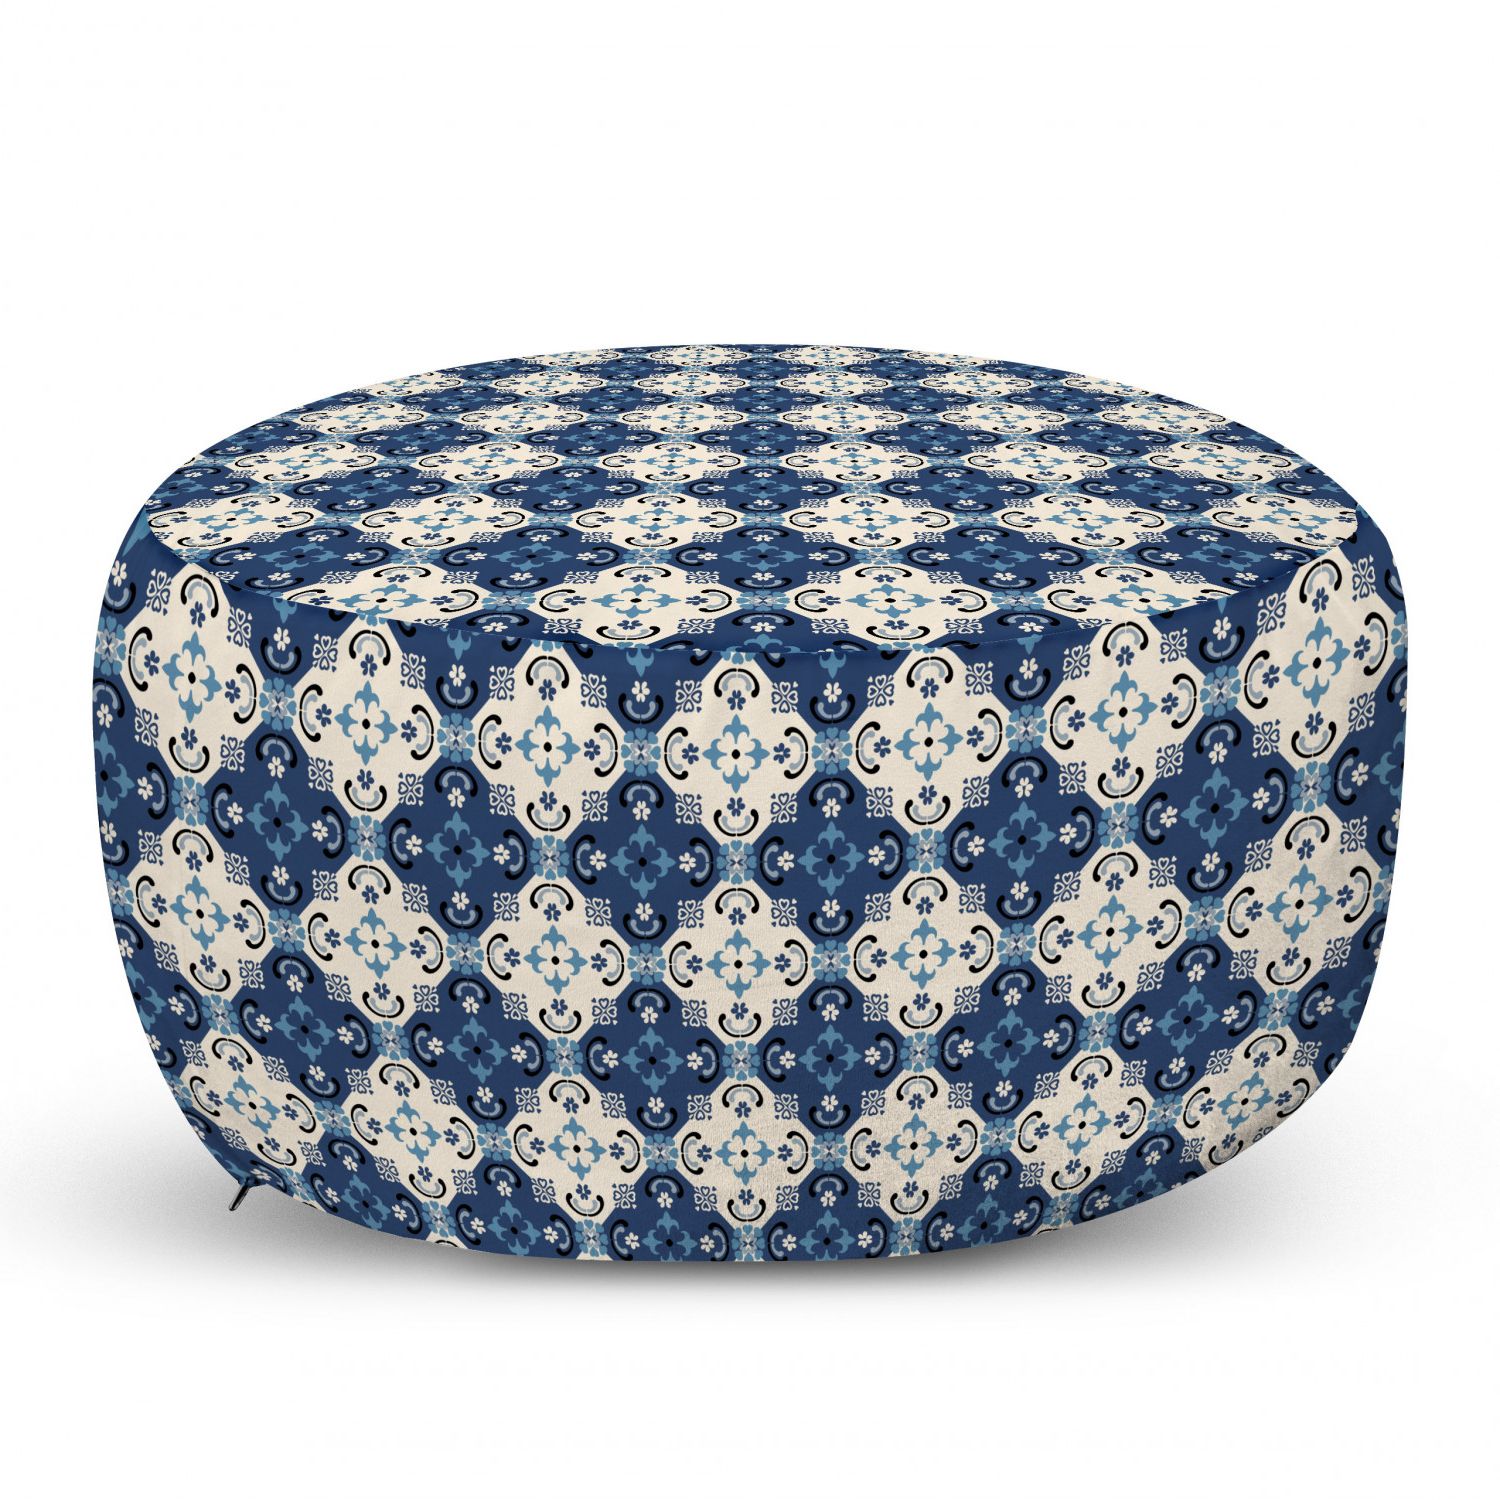 Well Known Moroccan Ottoman Pouf, Repetitive Floral Inspired Patchwork Look Sea Tones  Illustration, Decorative Soft Foot Rest With Removable Cover Living Room  And Bedroom, Dark Sky Blue Ivory,ambesonne – Walmart For Soft Ivory Geometric Ottomans (View 14 of 15)